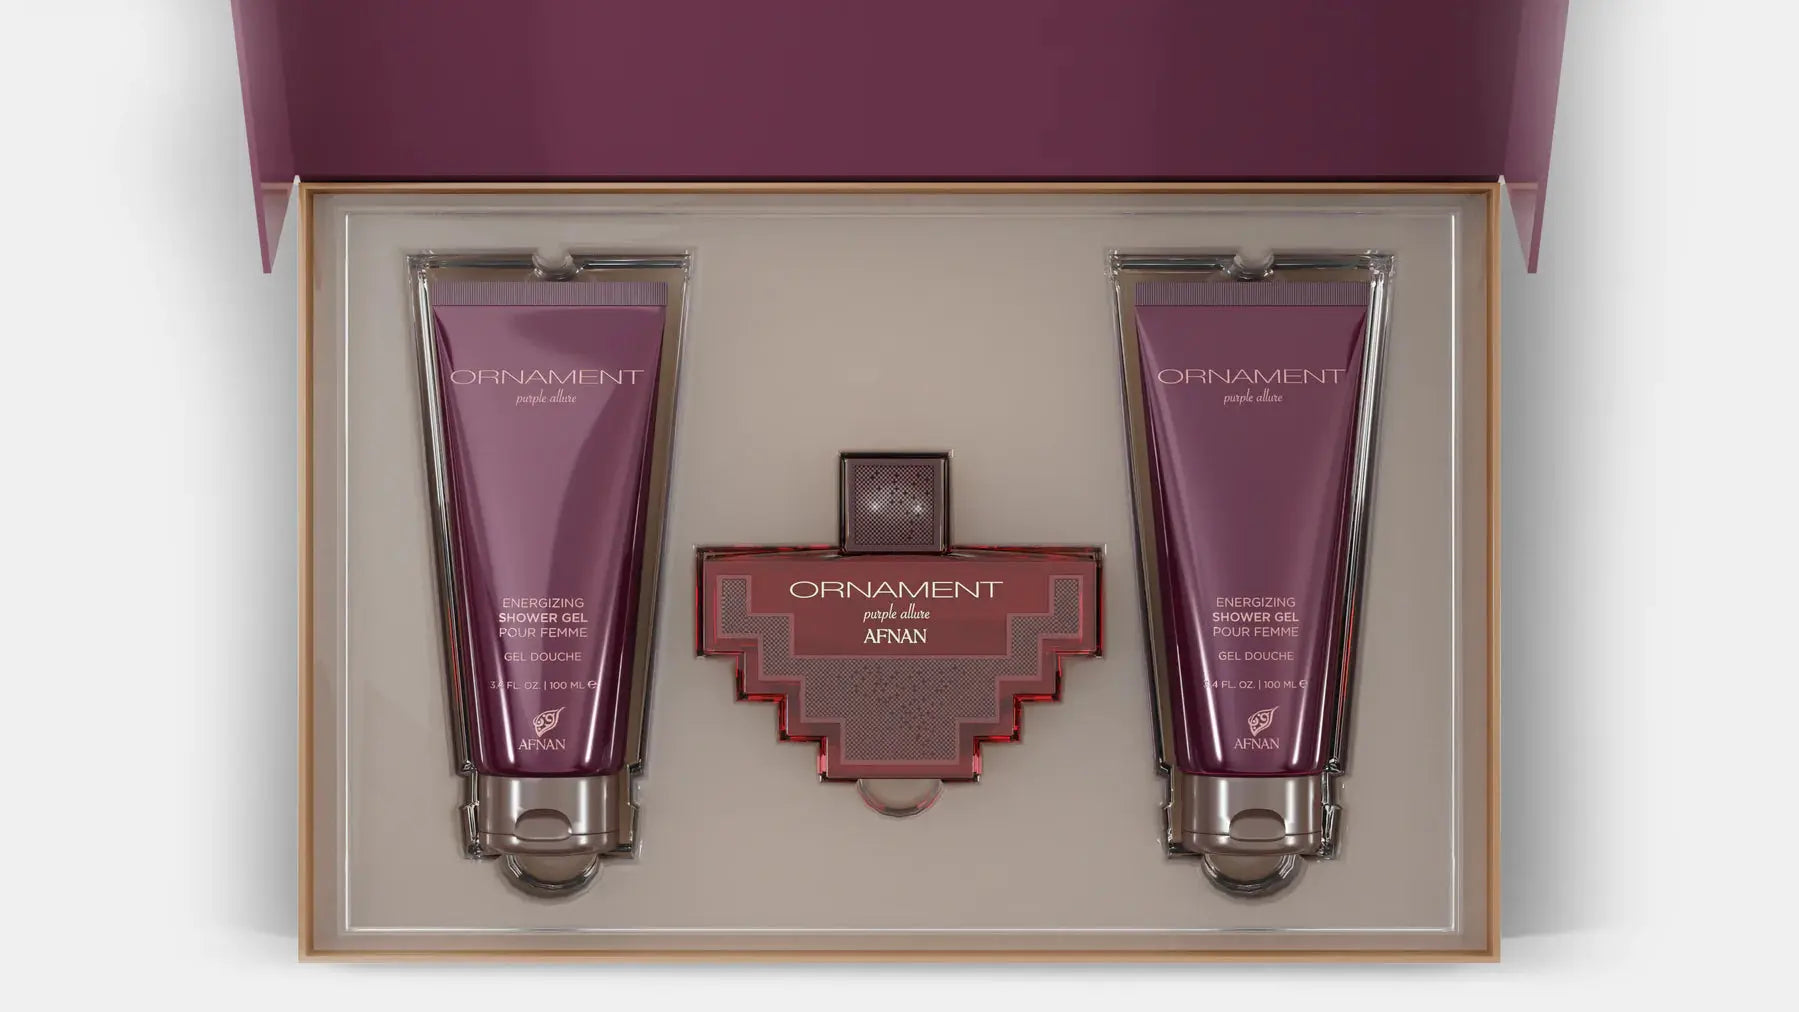 The image shows a gift set by Afnan Perfumes, "ORNAMENT purple allure". It features a perfume bottle and two tubes of shower gel, all in a coordinated deep purple color. The bottle has a unique, cross-shaped design with a red body and silver metalwork. The shower gels are labeled "ENERGIZING SHOWER GEL POUR FEMME" and are housed in sleek, metallic purple tubes.